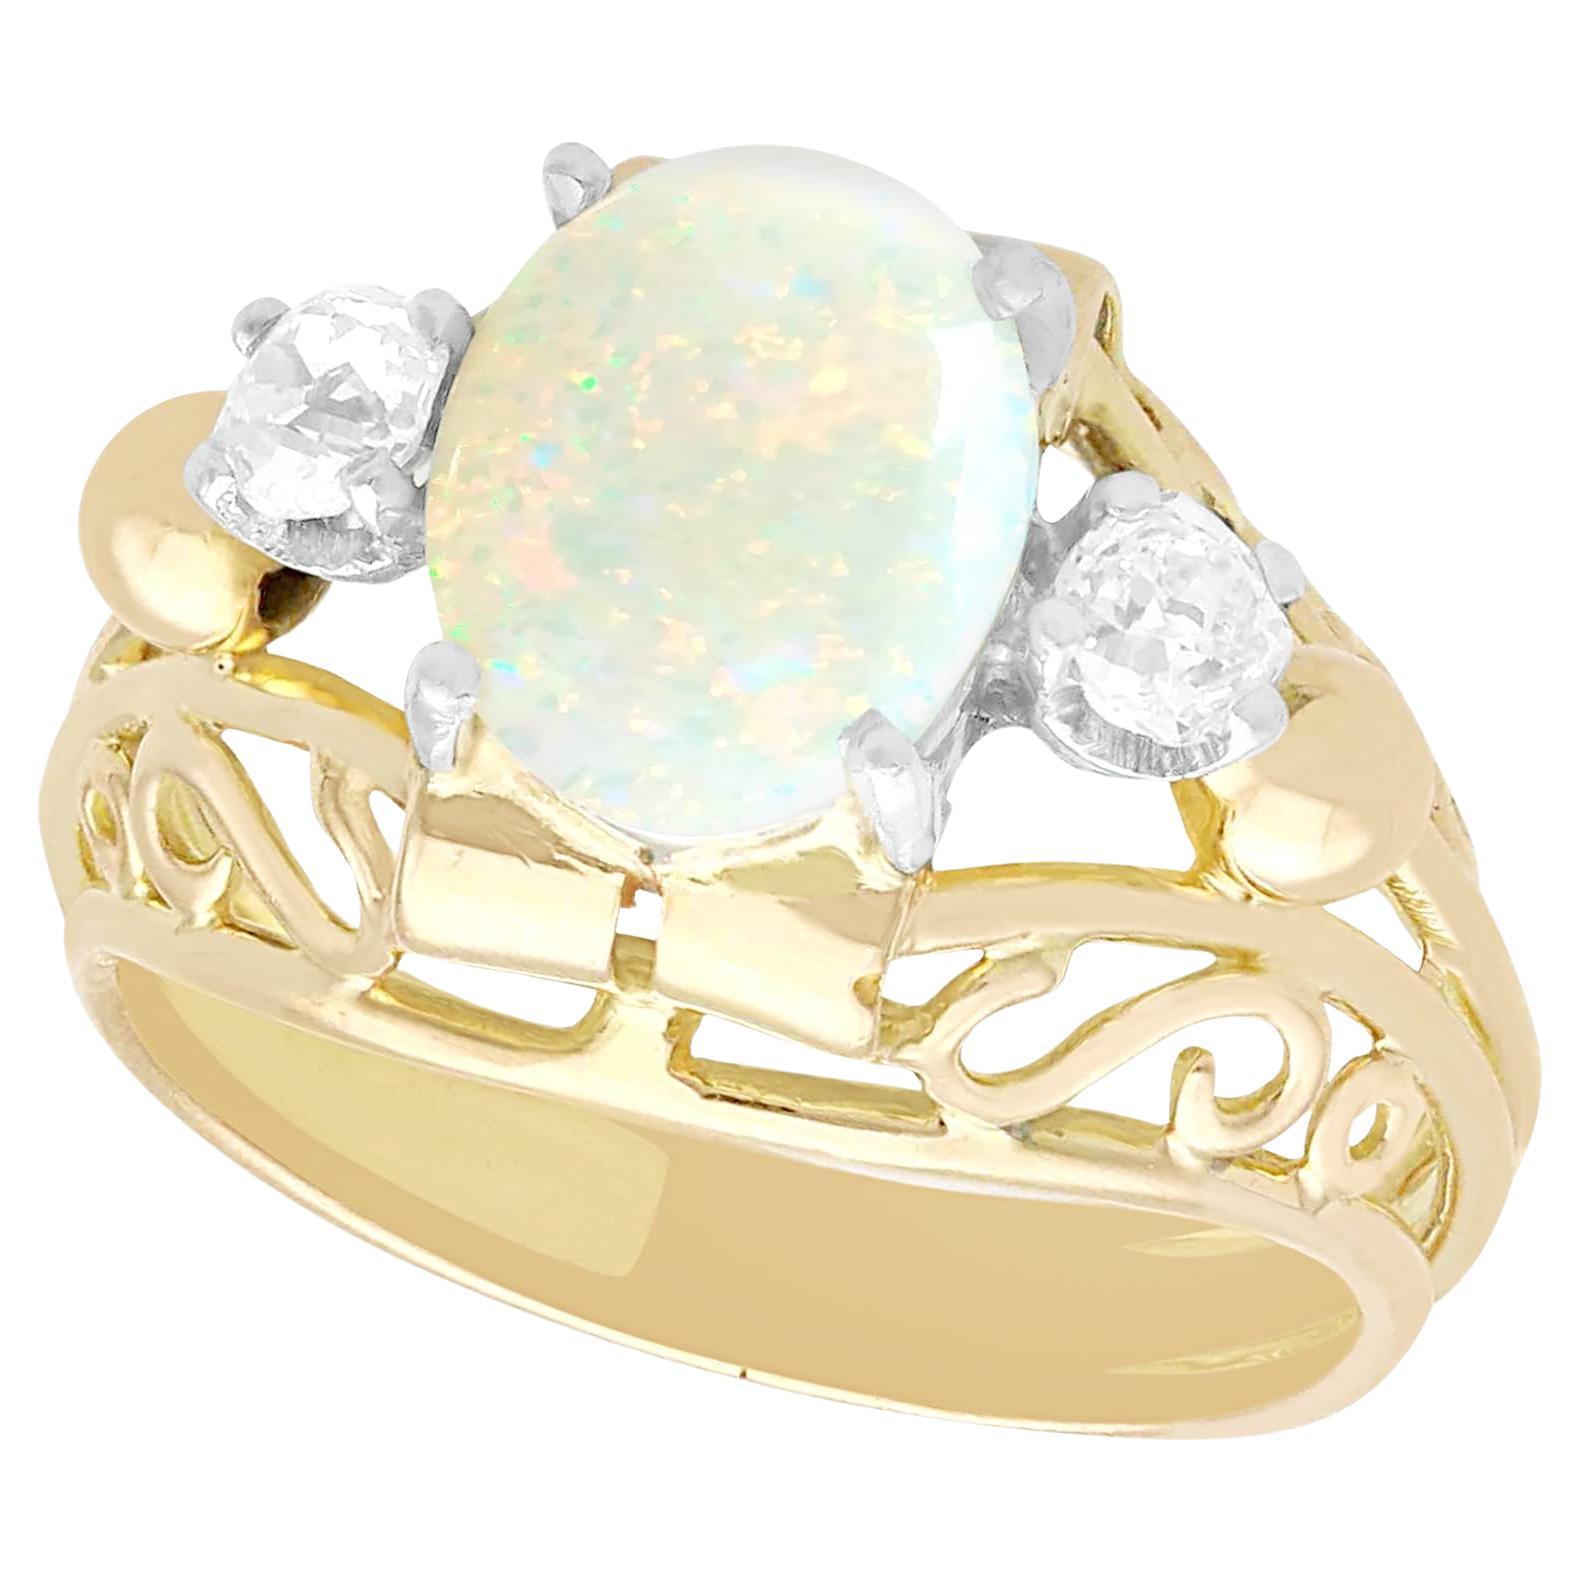 1930s, French, 1.82 Carat Cabochon Cut Opal and Diamond 18K Yellow Gold Ring For Sale